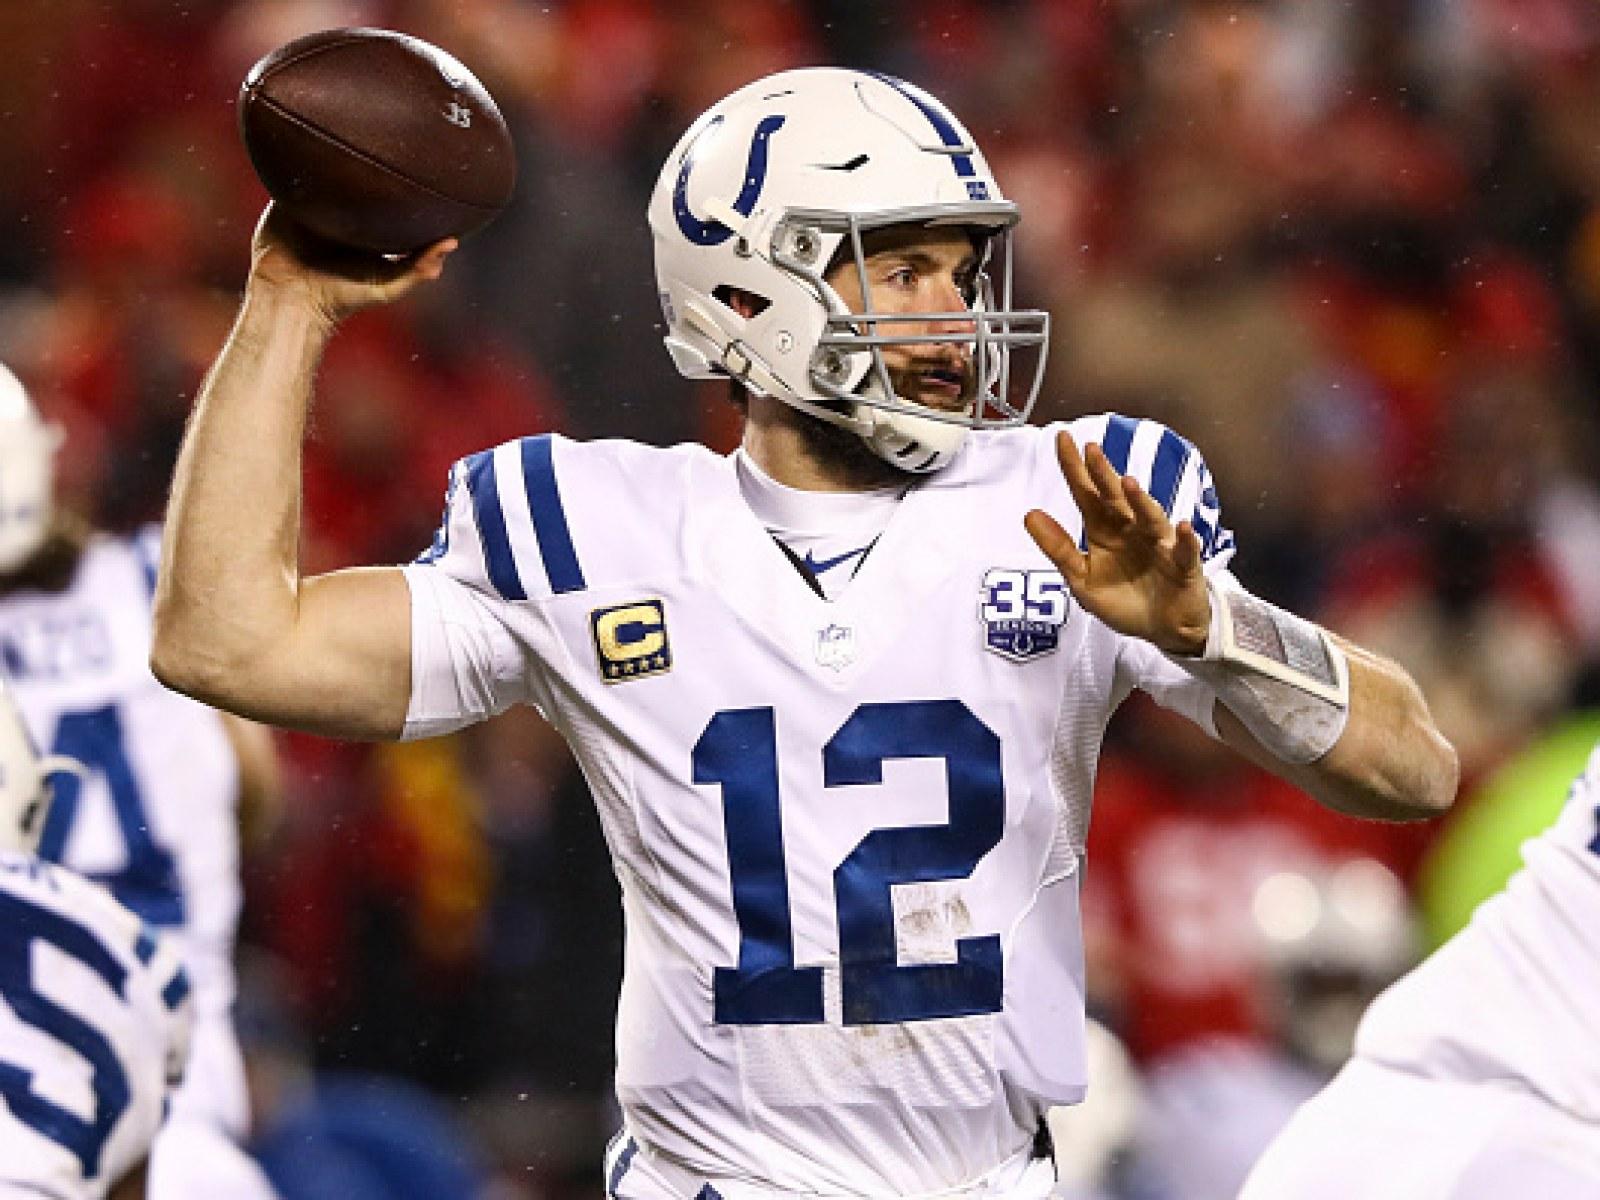 Colts Quarterback Andrew Luck To Retire From NFL on Sunday